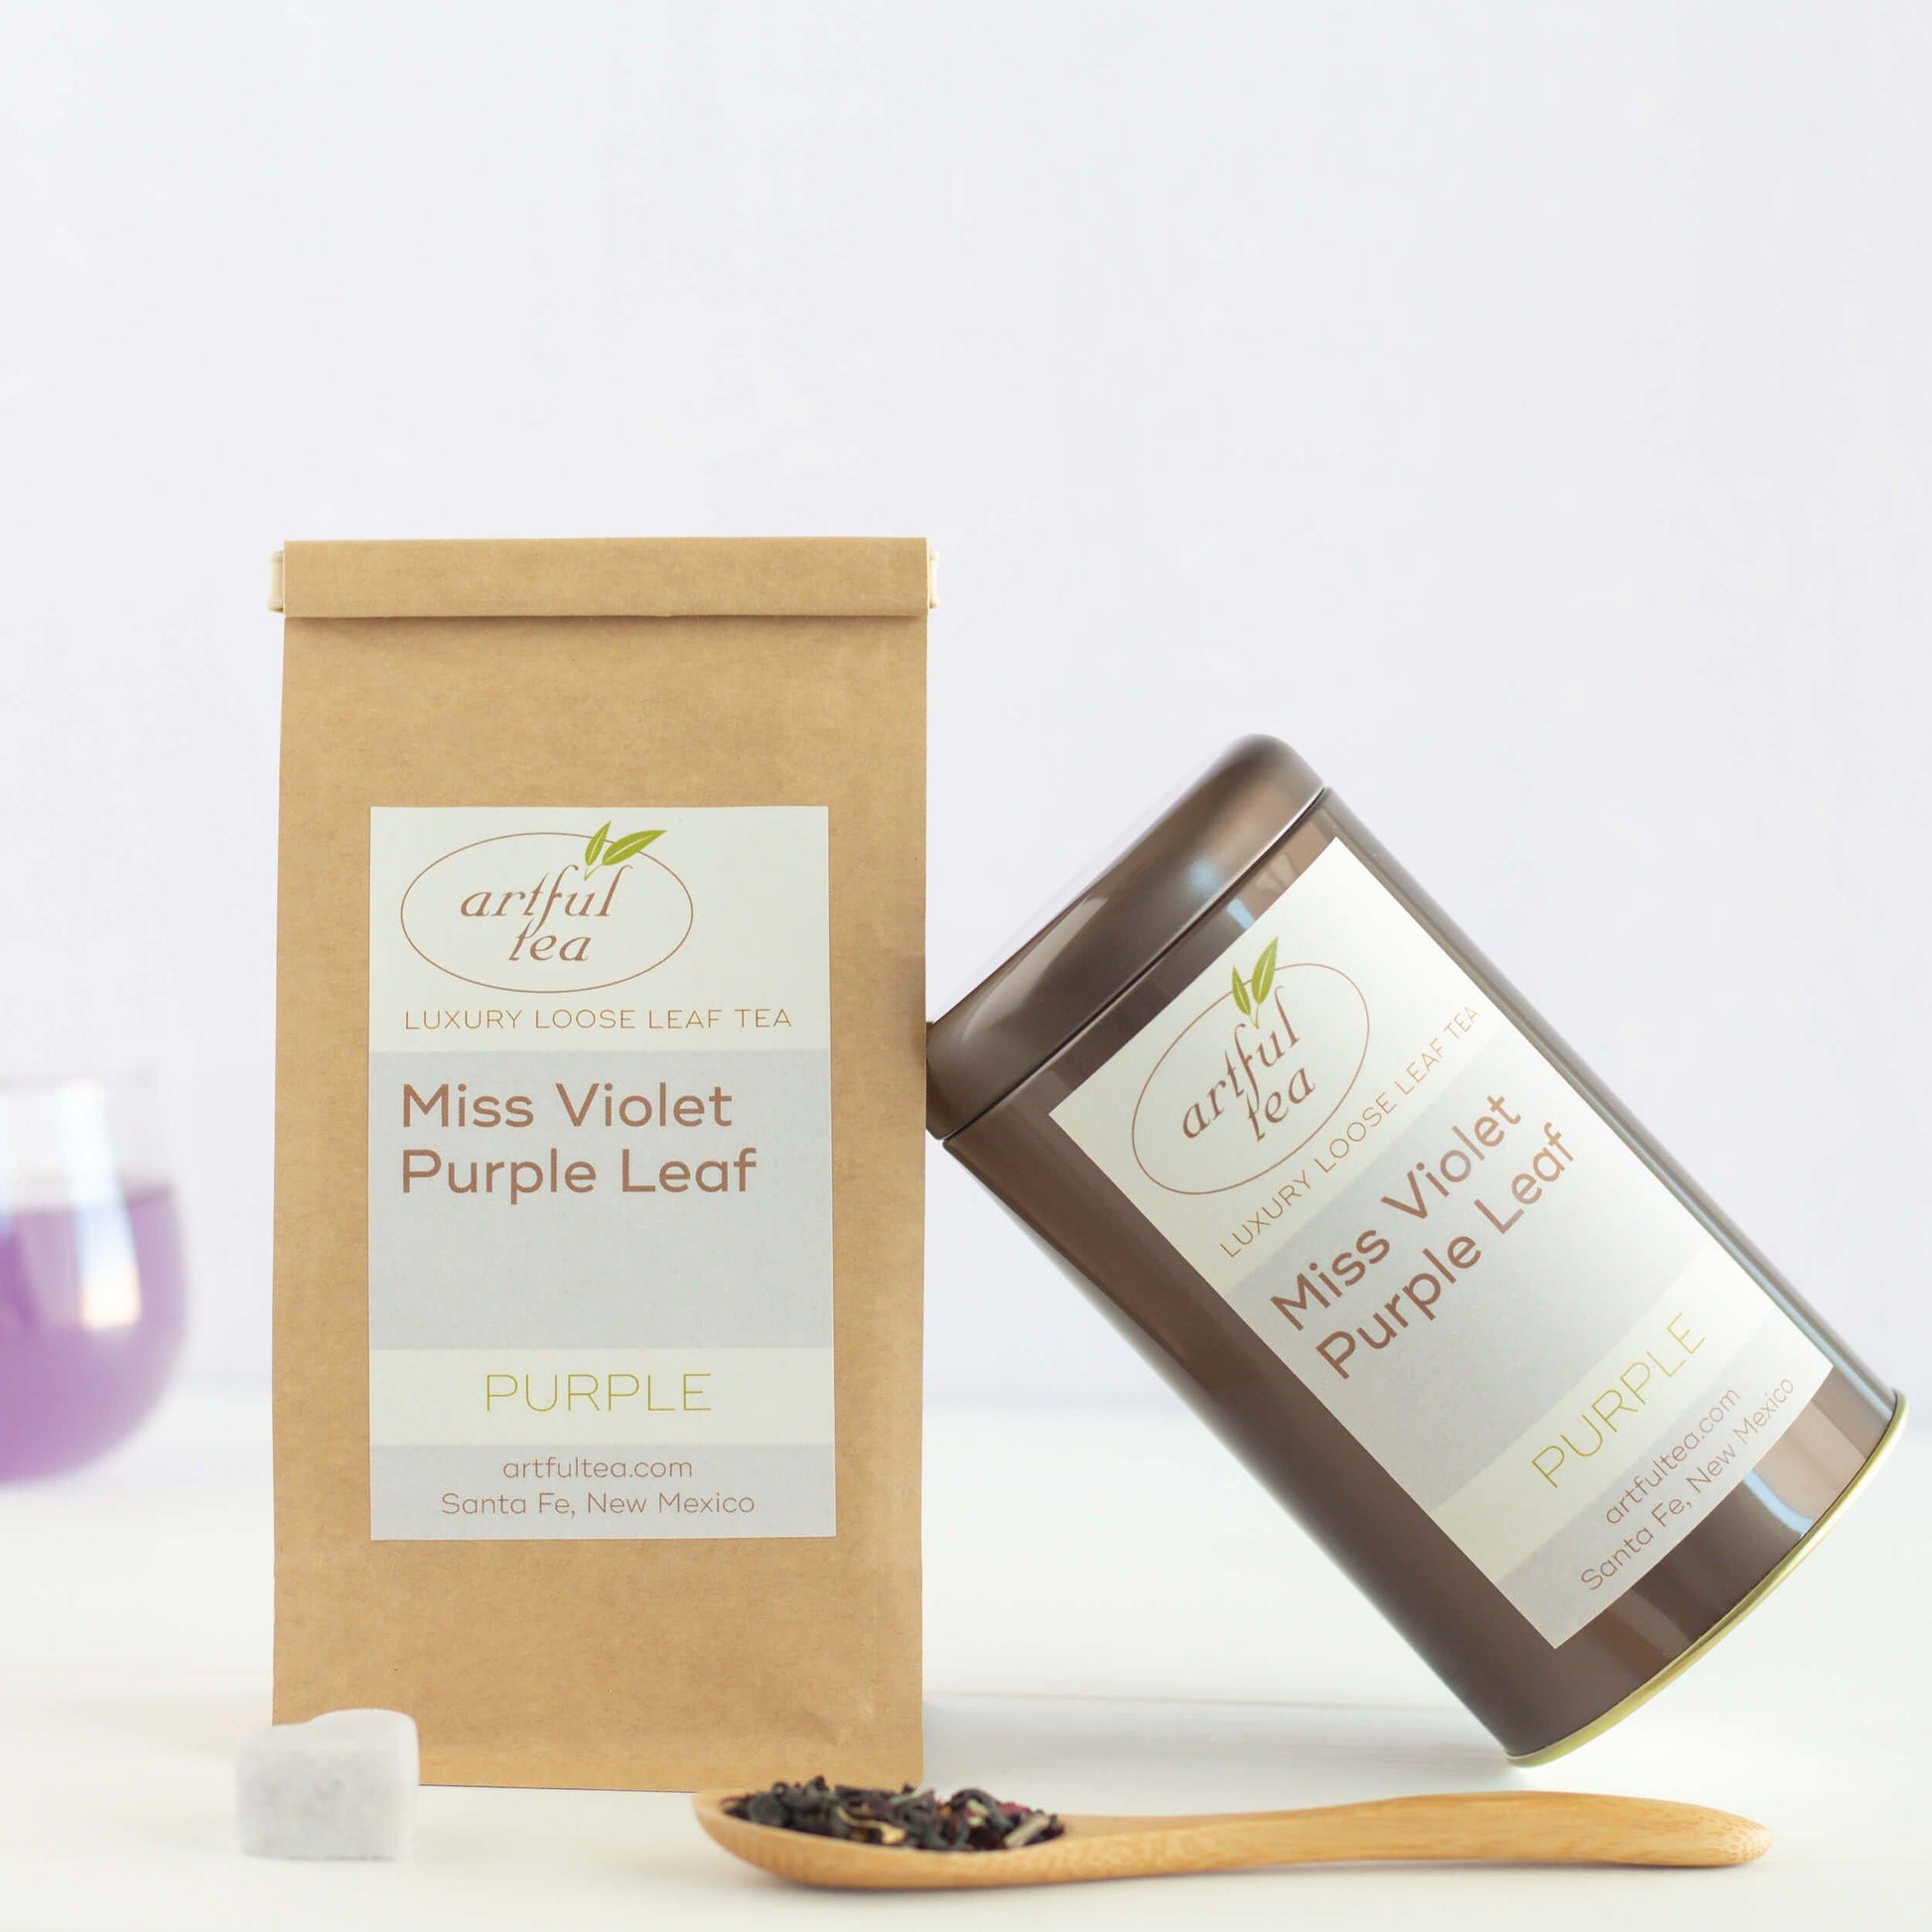 Bag and tin of Miss Violet Purple Leaf Tea with spoon